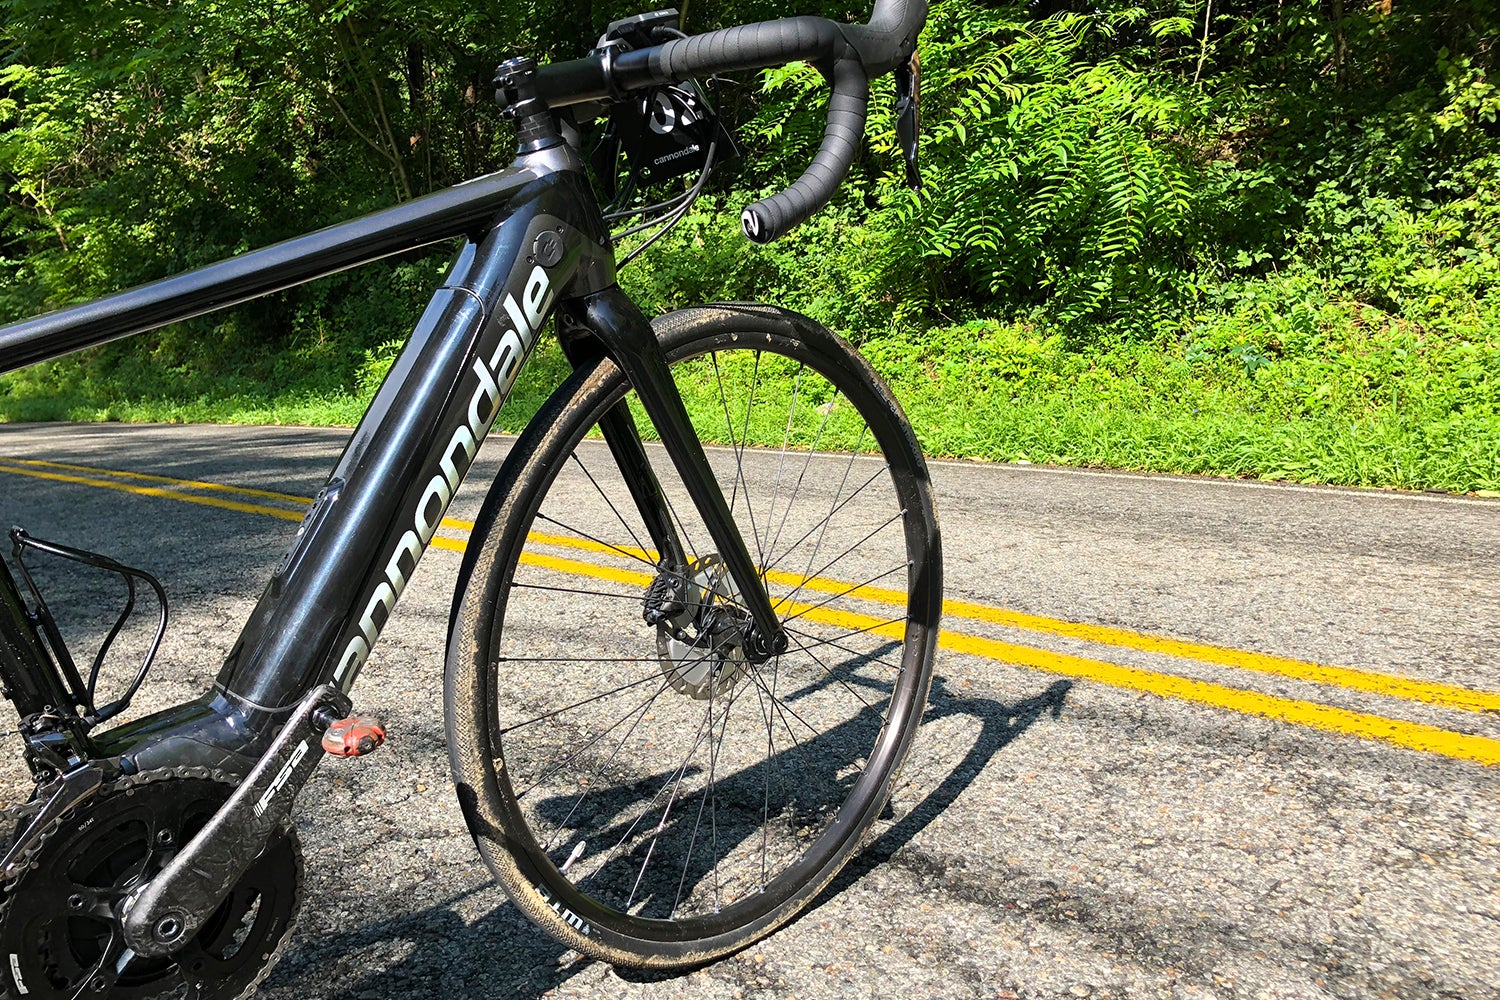 Presenting the All-New 2019 Cannondale Synapse Neo E-Road Bike